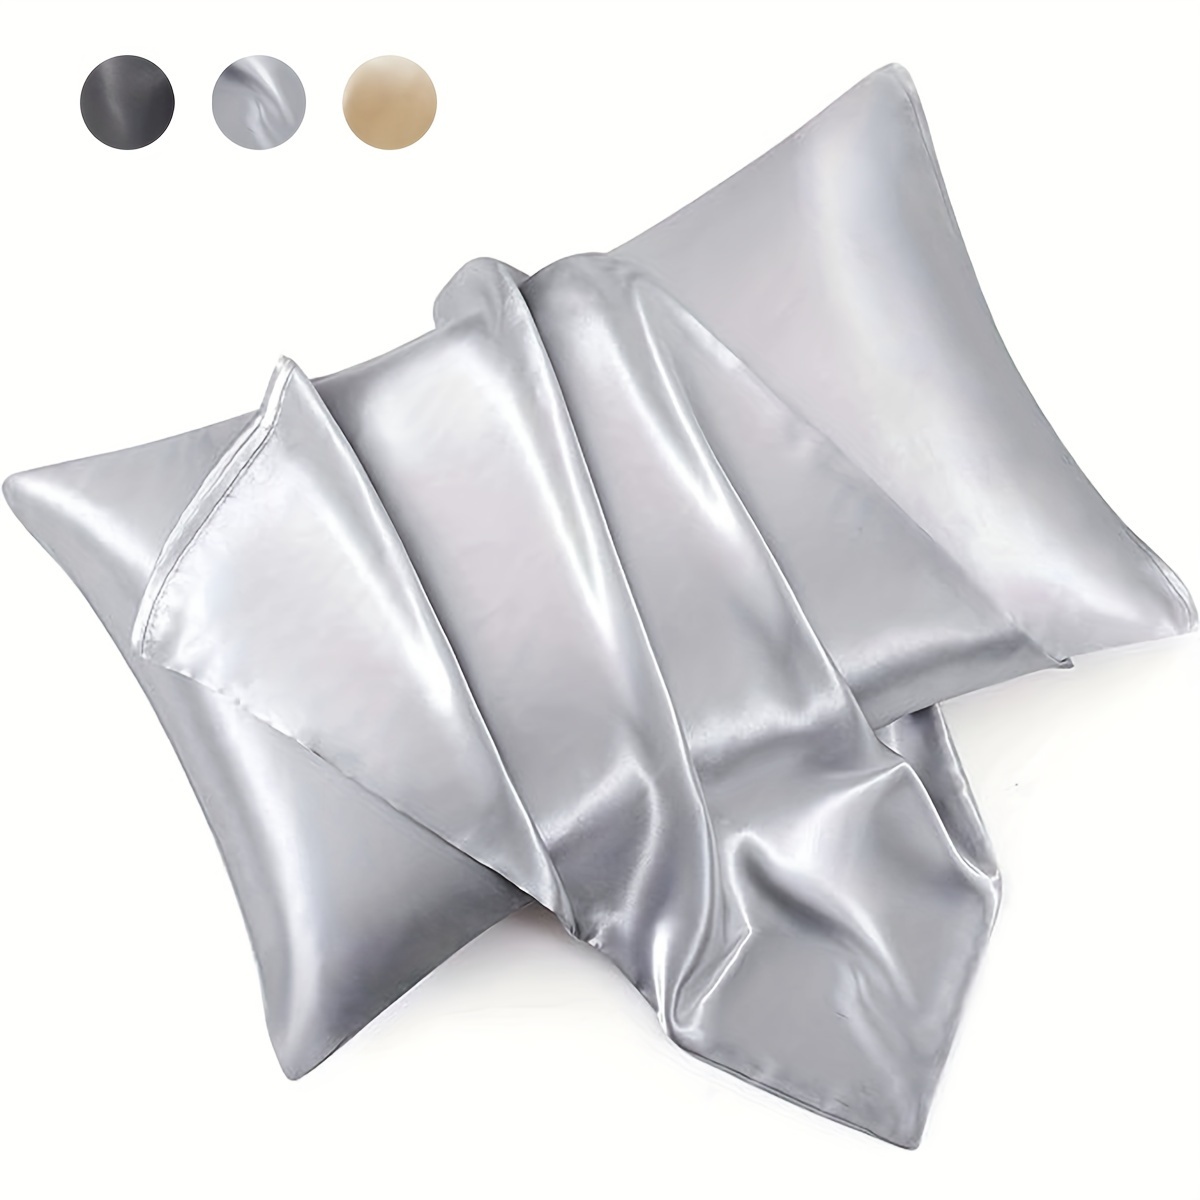 

Luxury Satin Pillowcase For Hair And Skin, Ultra-fine Microfiber Pillow Cover, Soft Bed Pillowcase With Envelope Closure, Machine Washable, Woven Pattern - 1pc